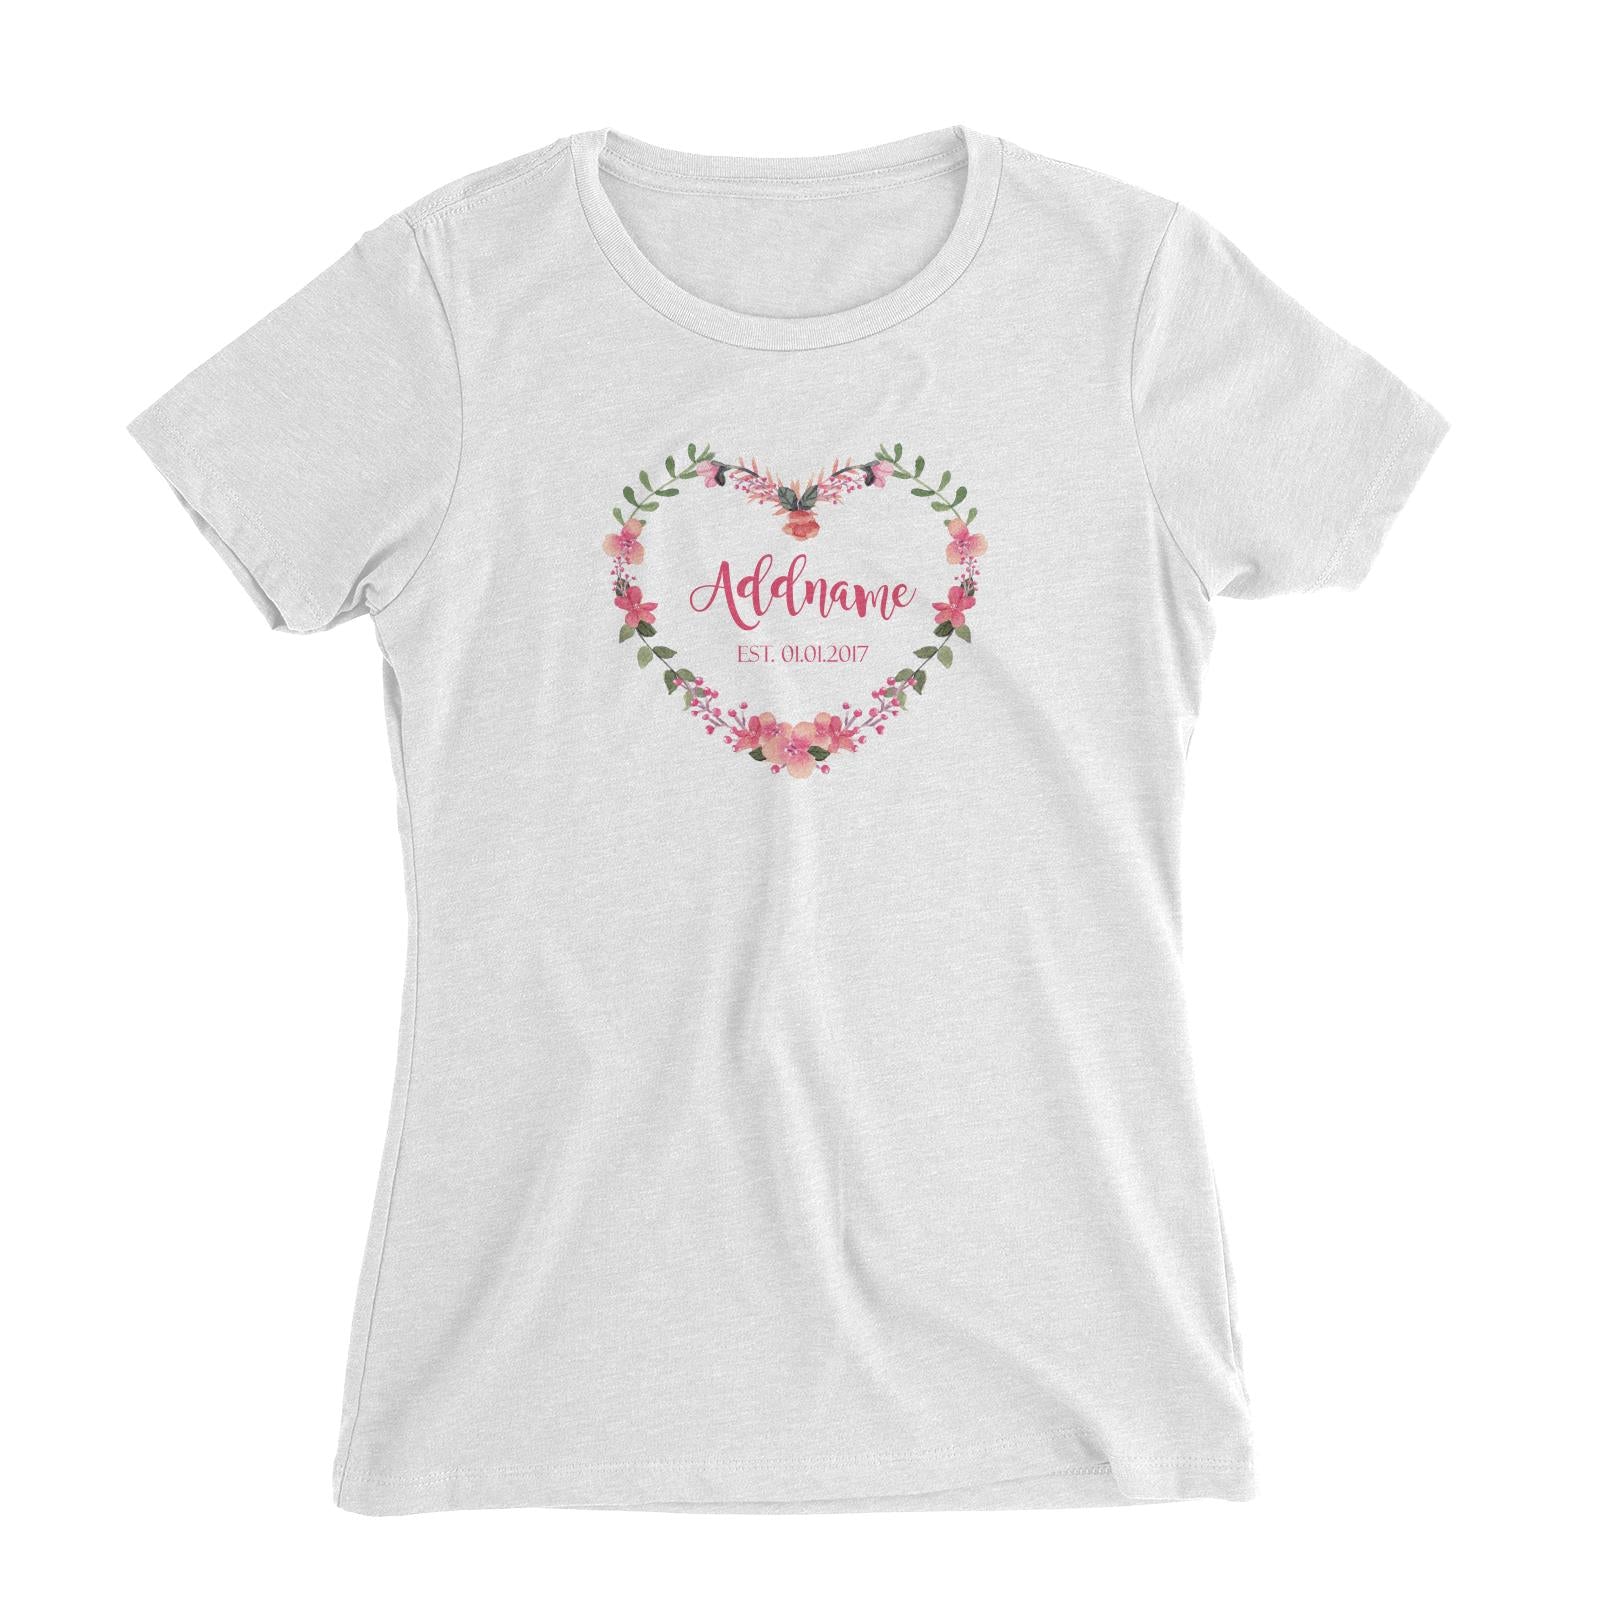 Add Name and Add Date in Pink Heart Shaped Flower Wreath Women's Slim Fit T-Shirt